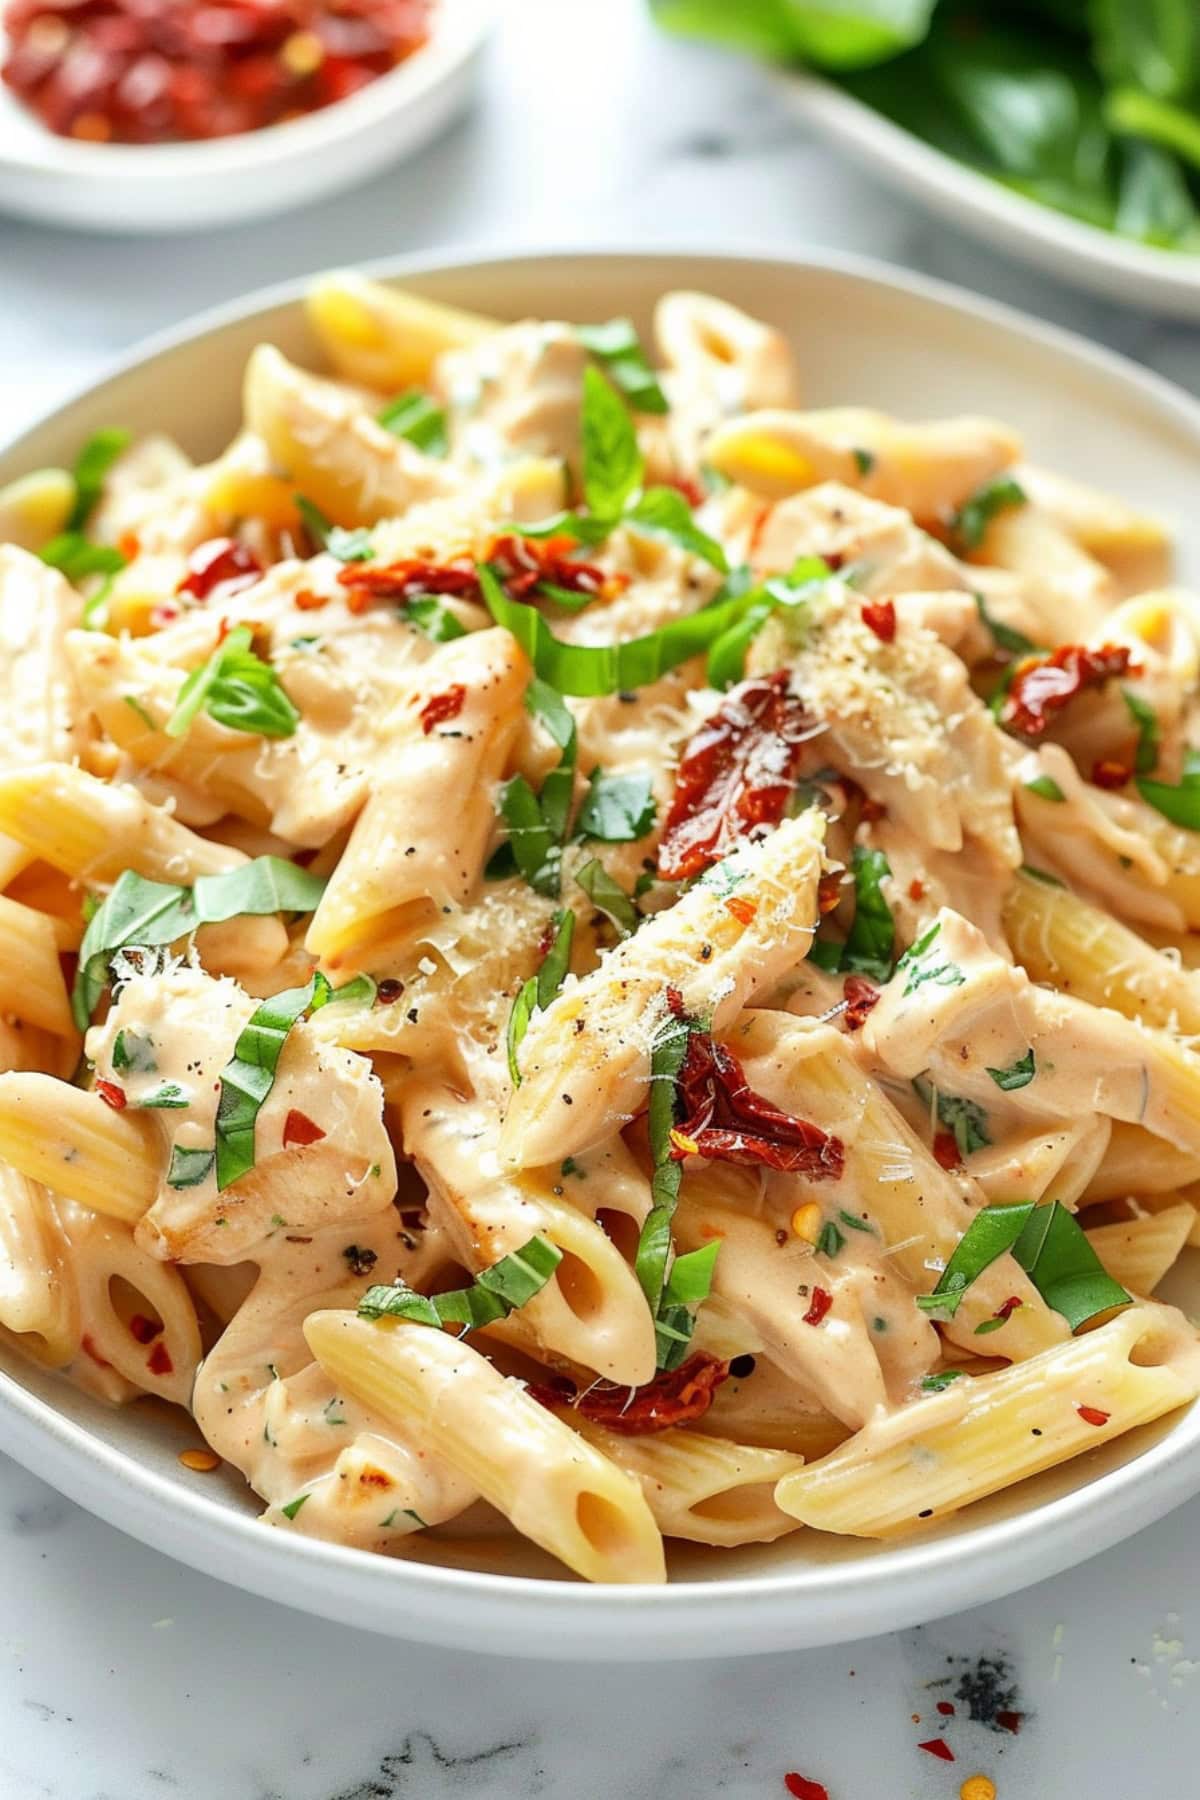 Sun-dried tomatoes mixed with penne pasta and creamy sauce.